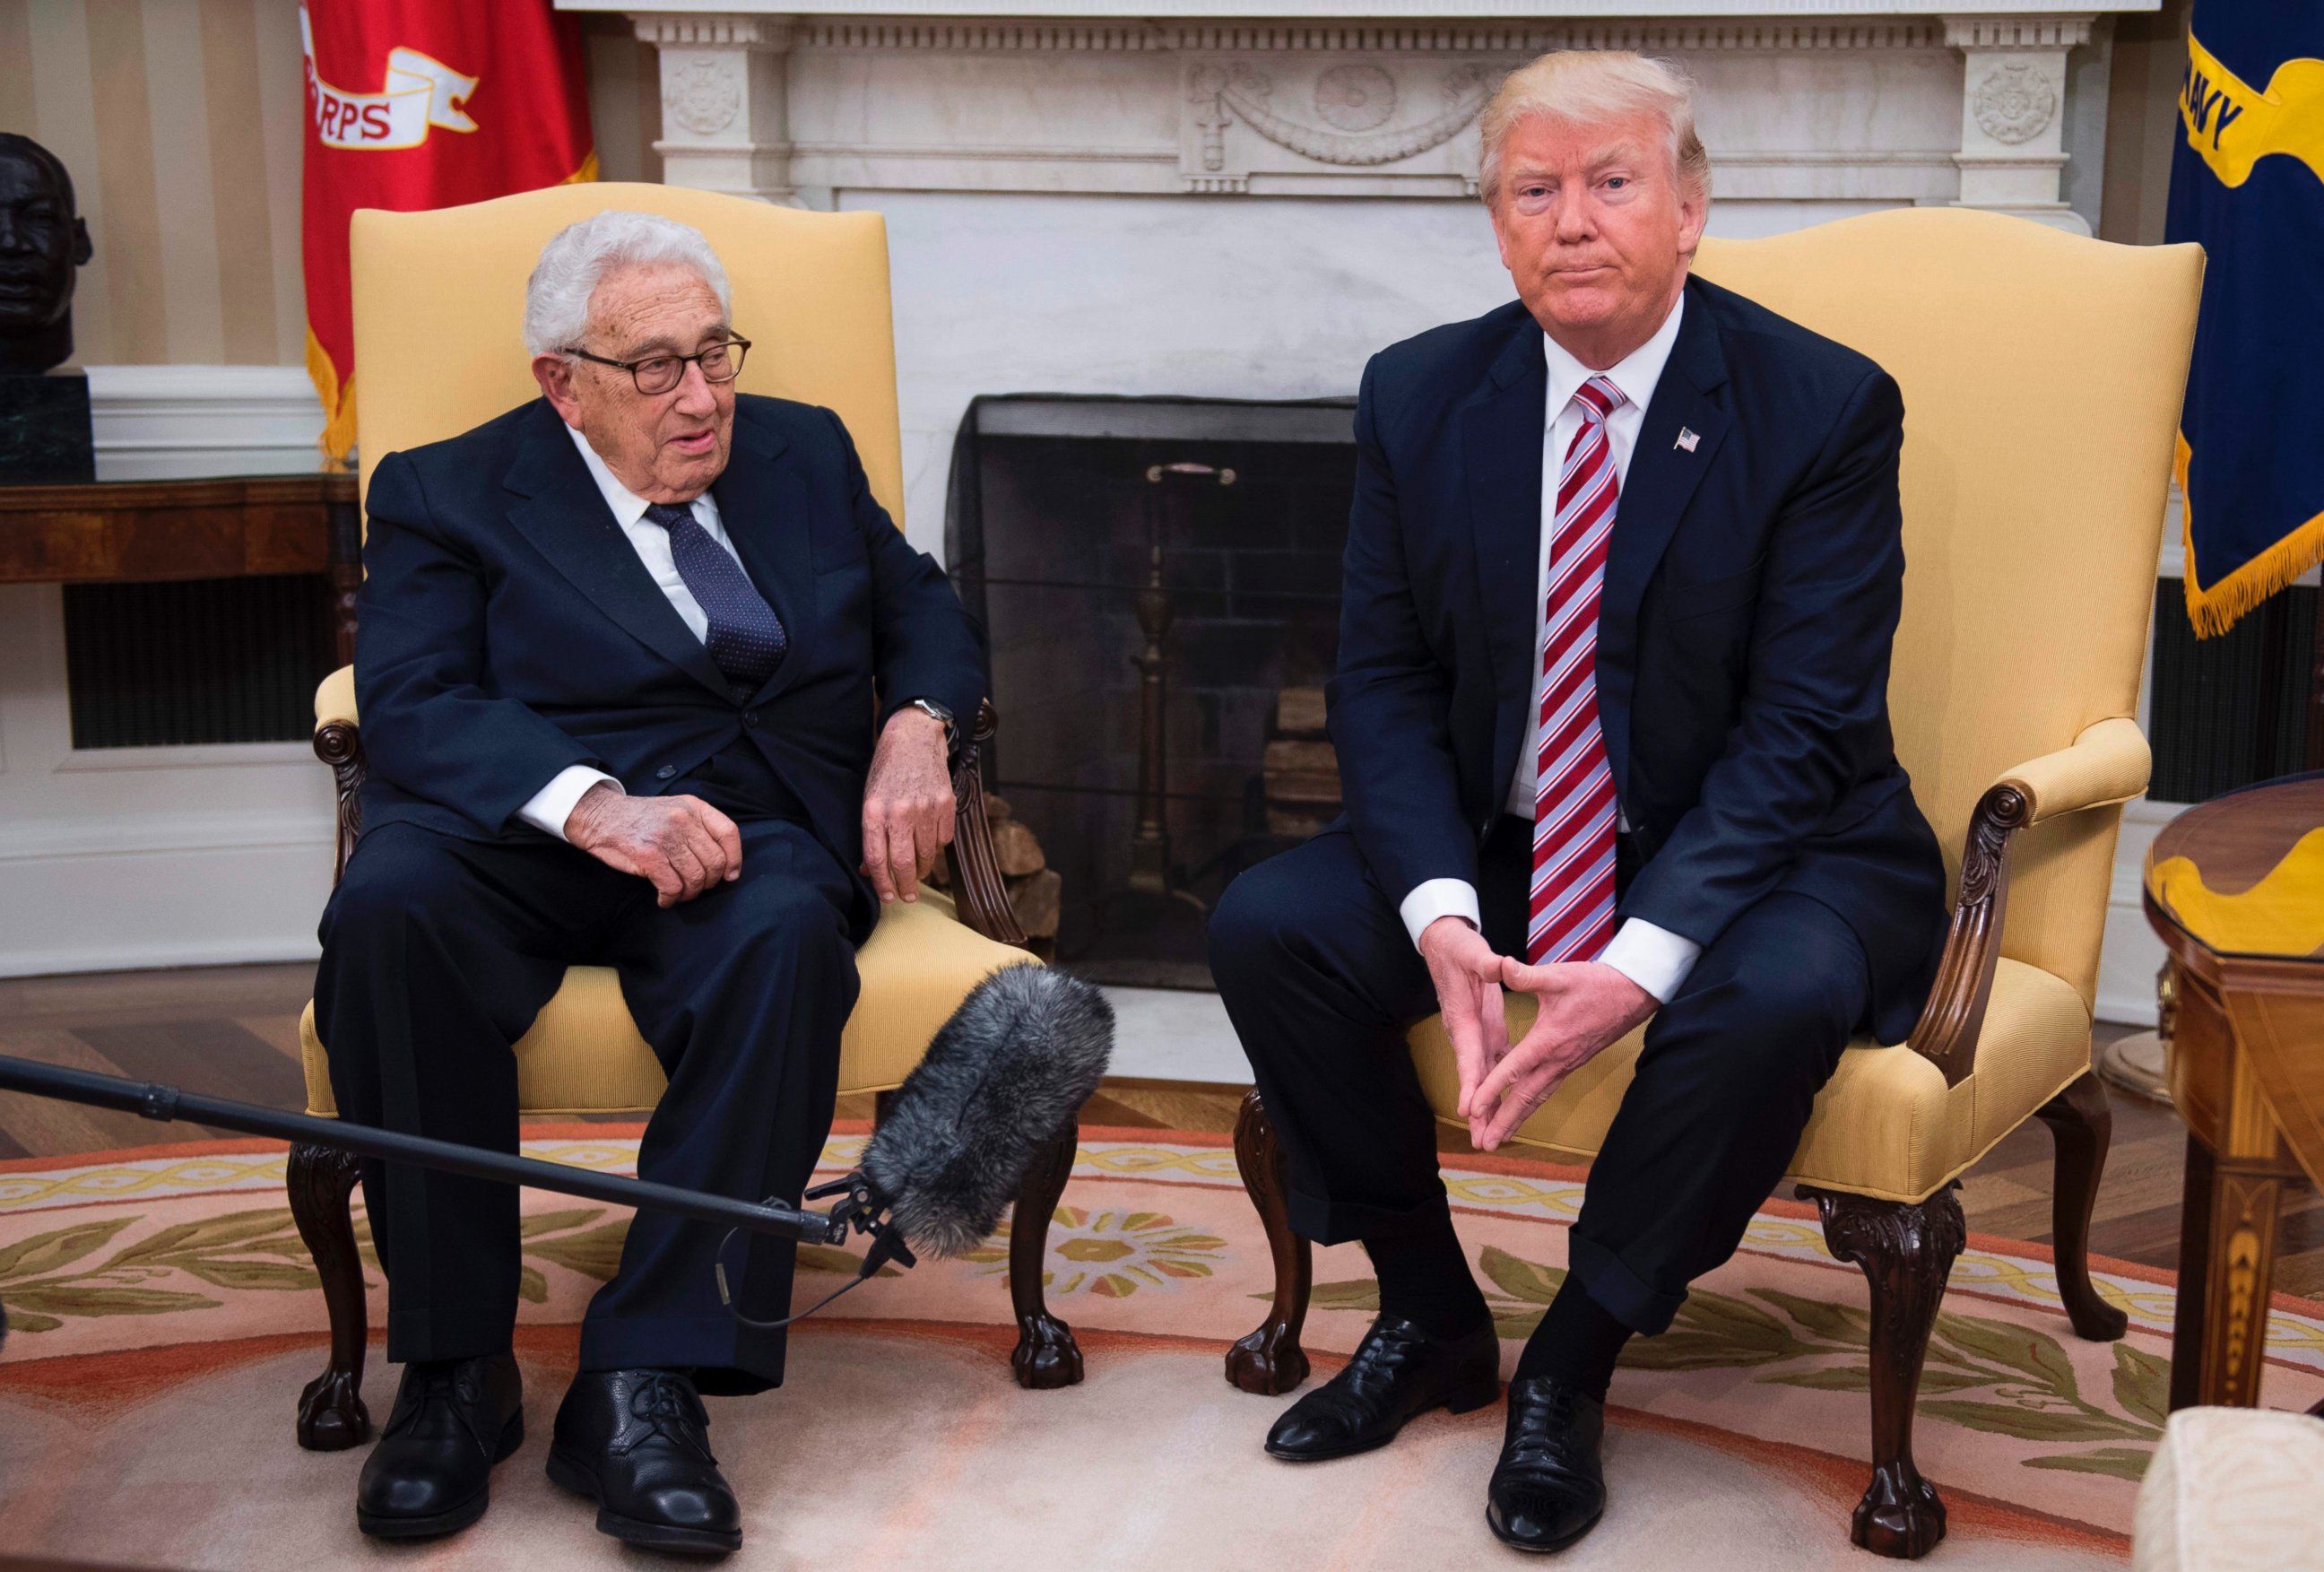 PHOTO: US President Donald Trump speaks with former Secretary of State Henry Kissinger during a meeting in the Oval Office of the White House in Washington, May 10, 2017.